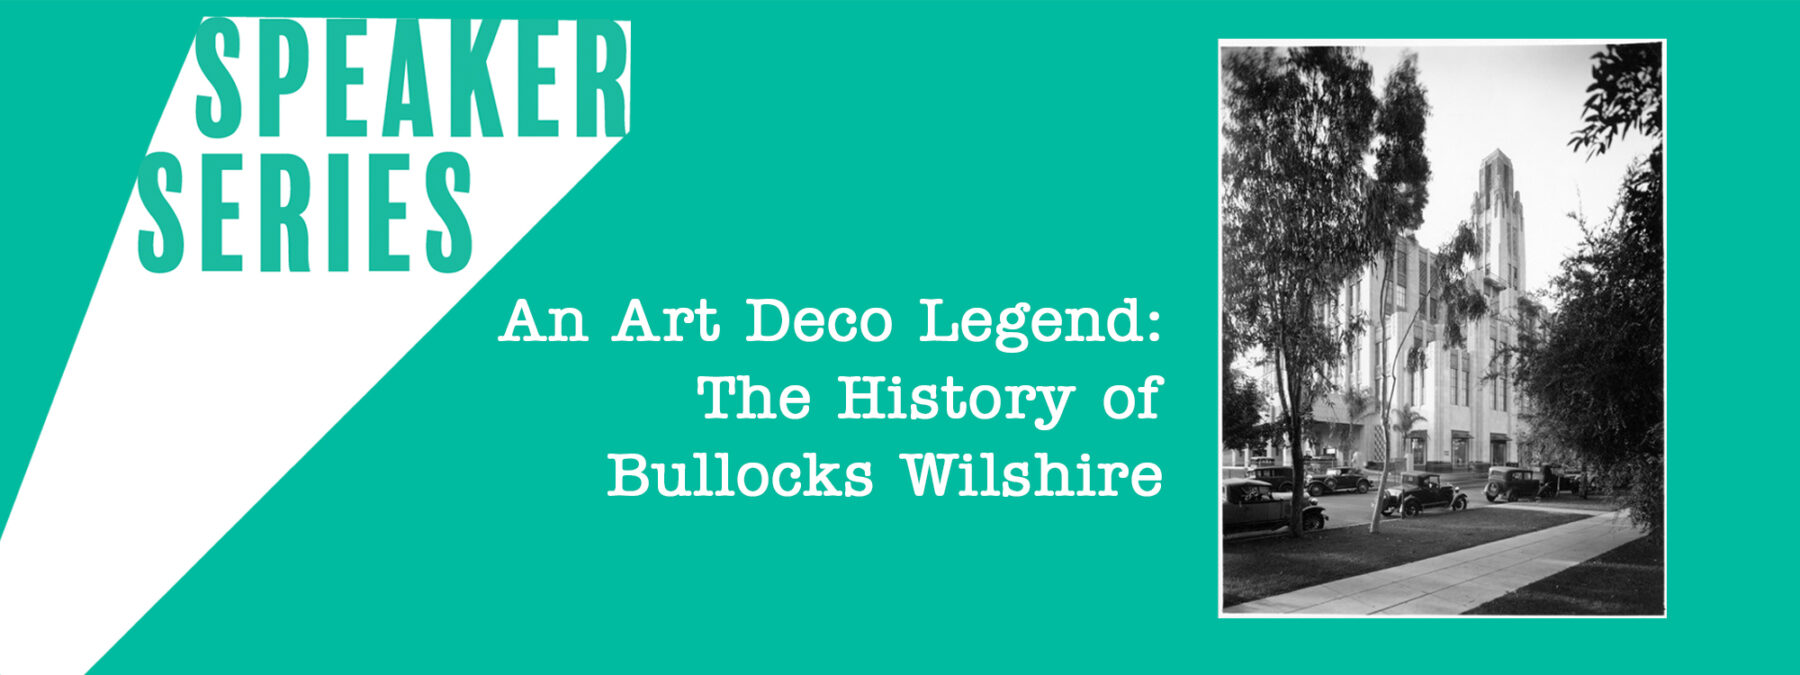 Speaker Series: An Art Deco Legend: The History of Bullocks Wilshire featuring black and white photo of Bullocks Wilshire